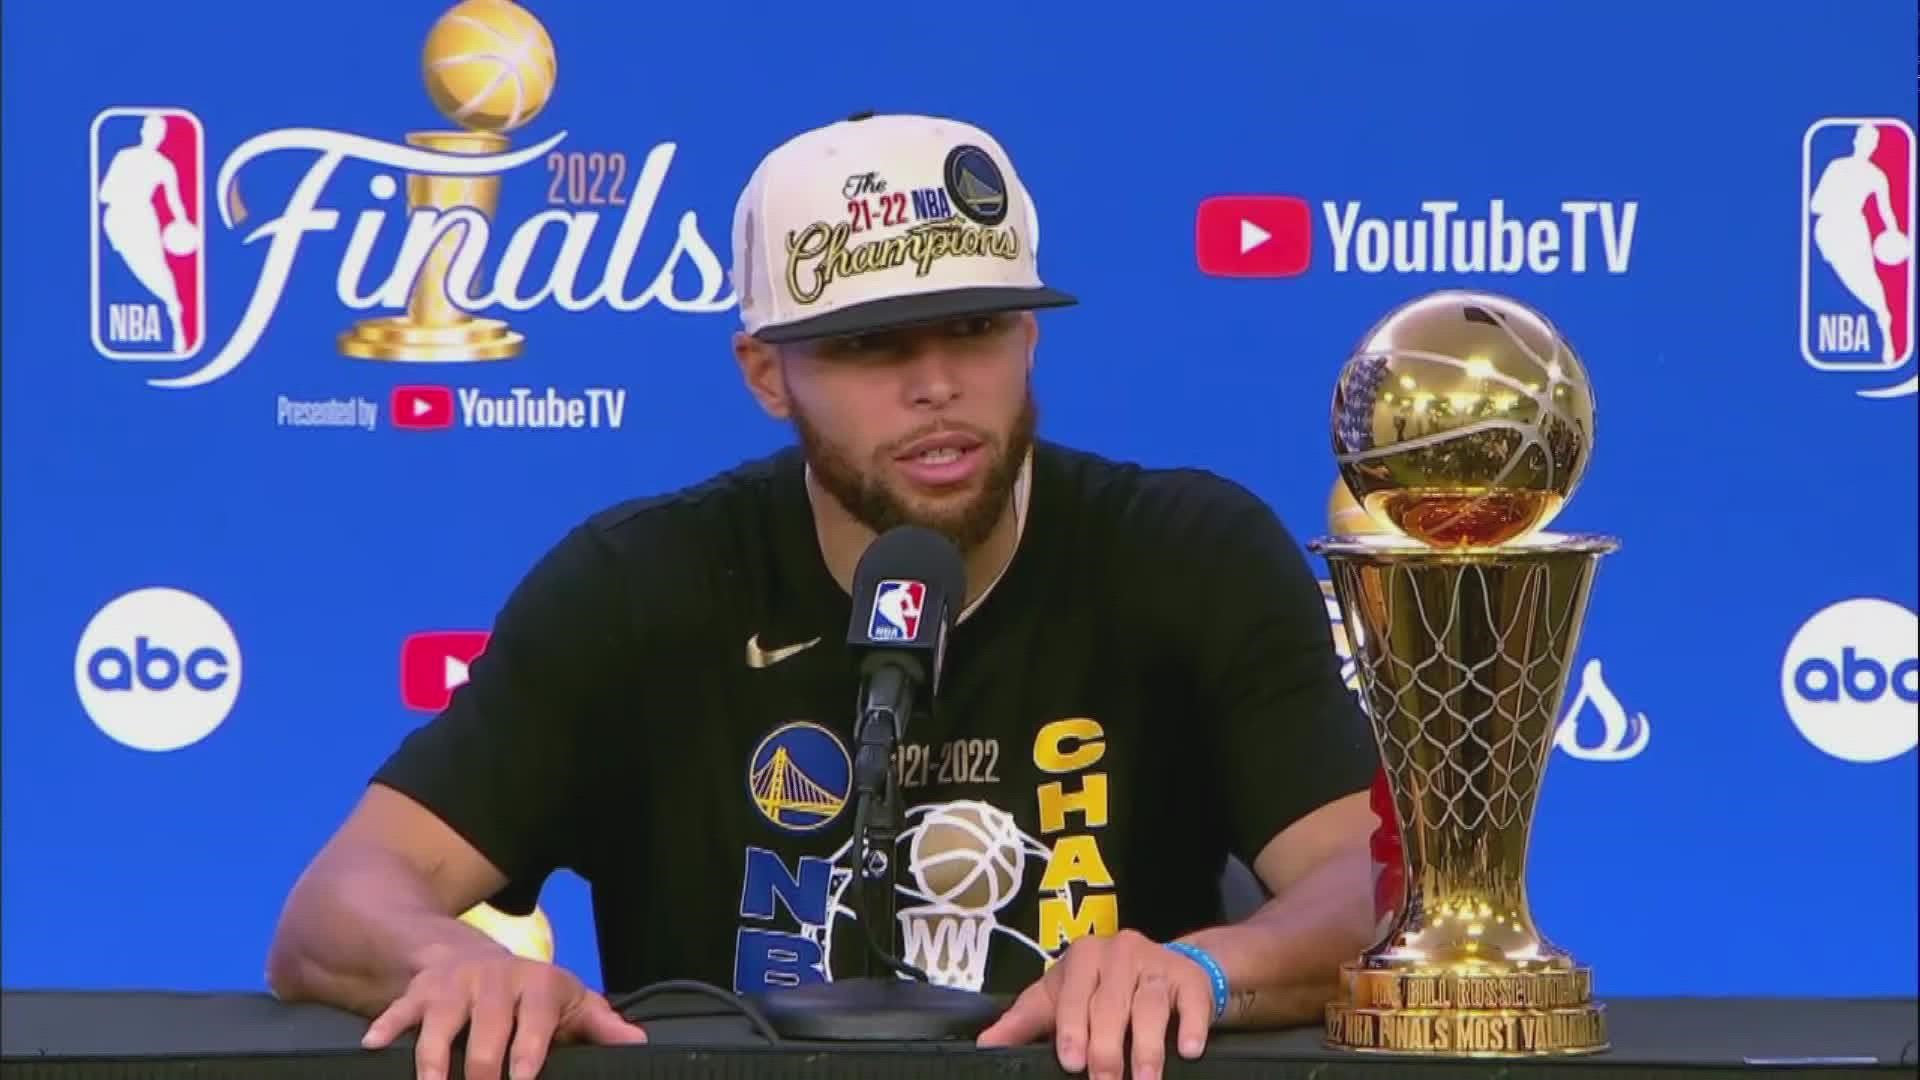 Golden State Warriors' Stephen Curry is sitting down for a brief postgame conference after winning Game 6 of the NBA Finals and clinching the conference.